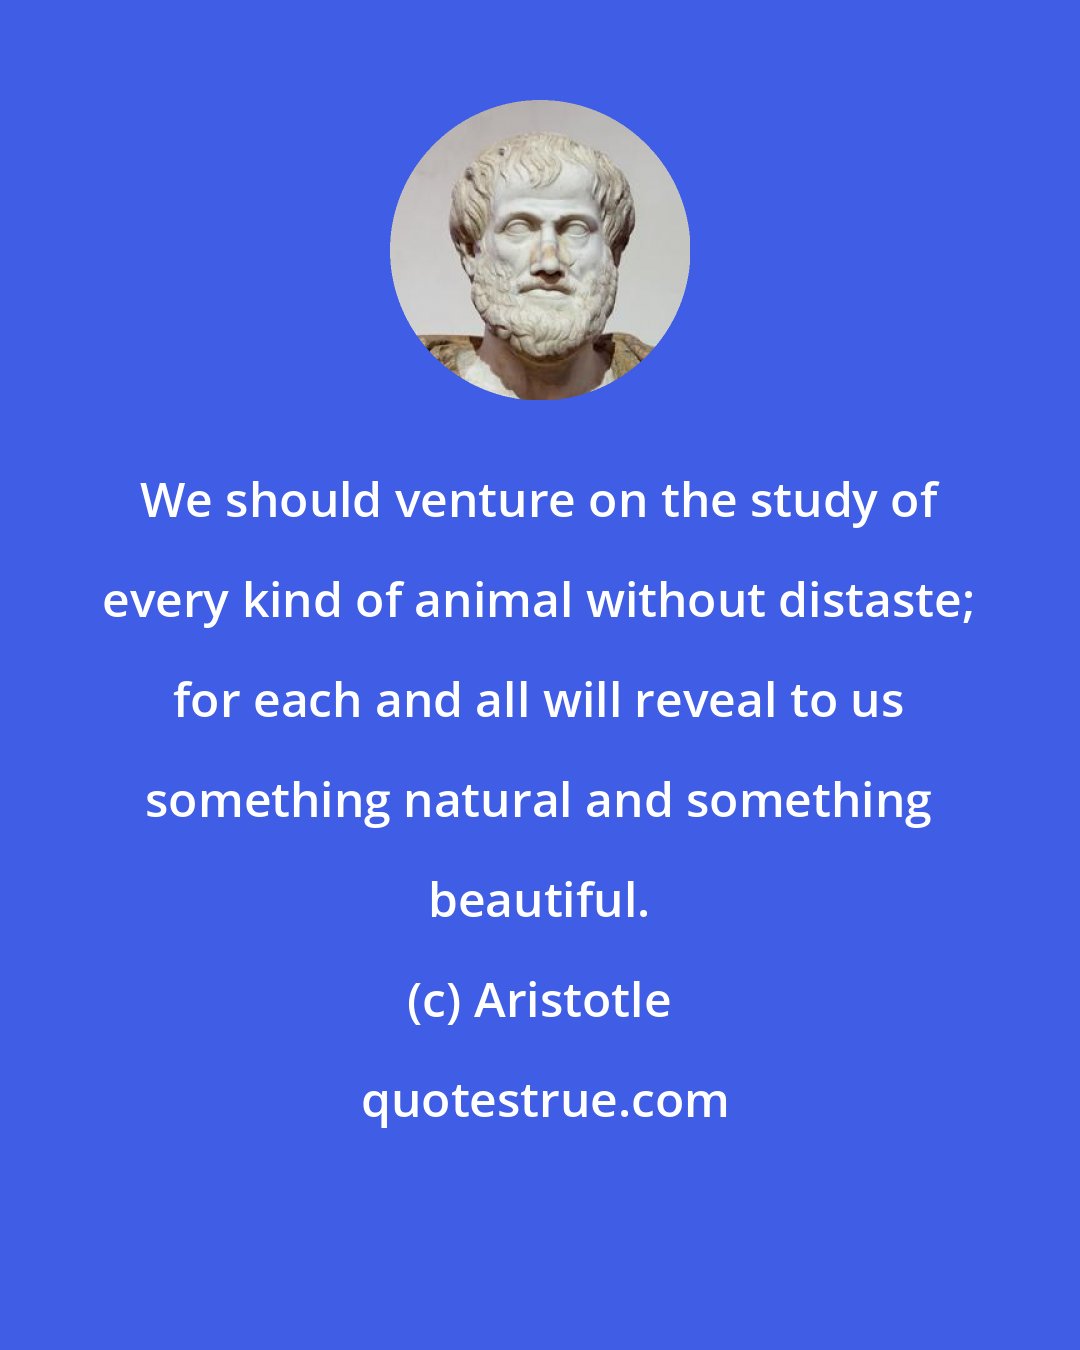 Aristotle: We should venture on the study of every kind of animal without distaste; for each and all will reveal to us something natural and something beautiful.